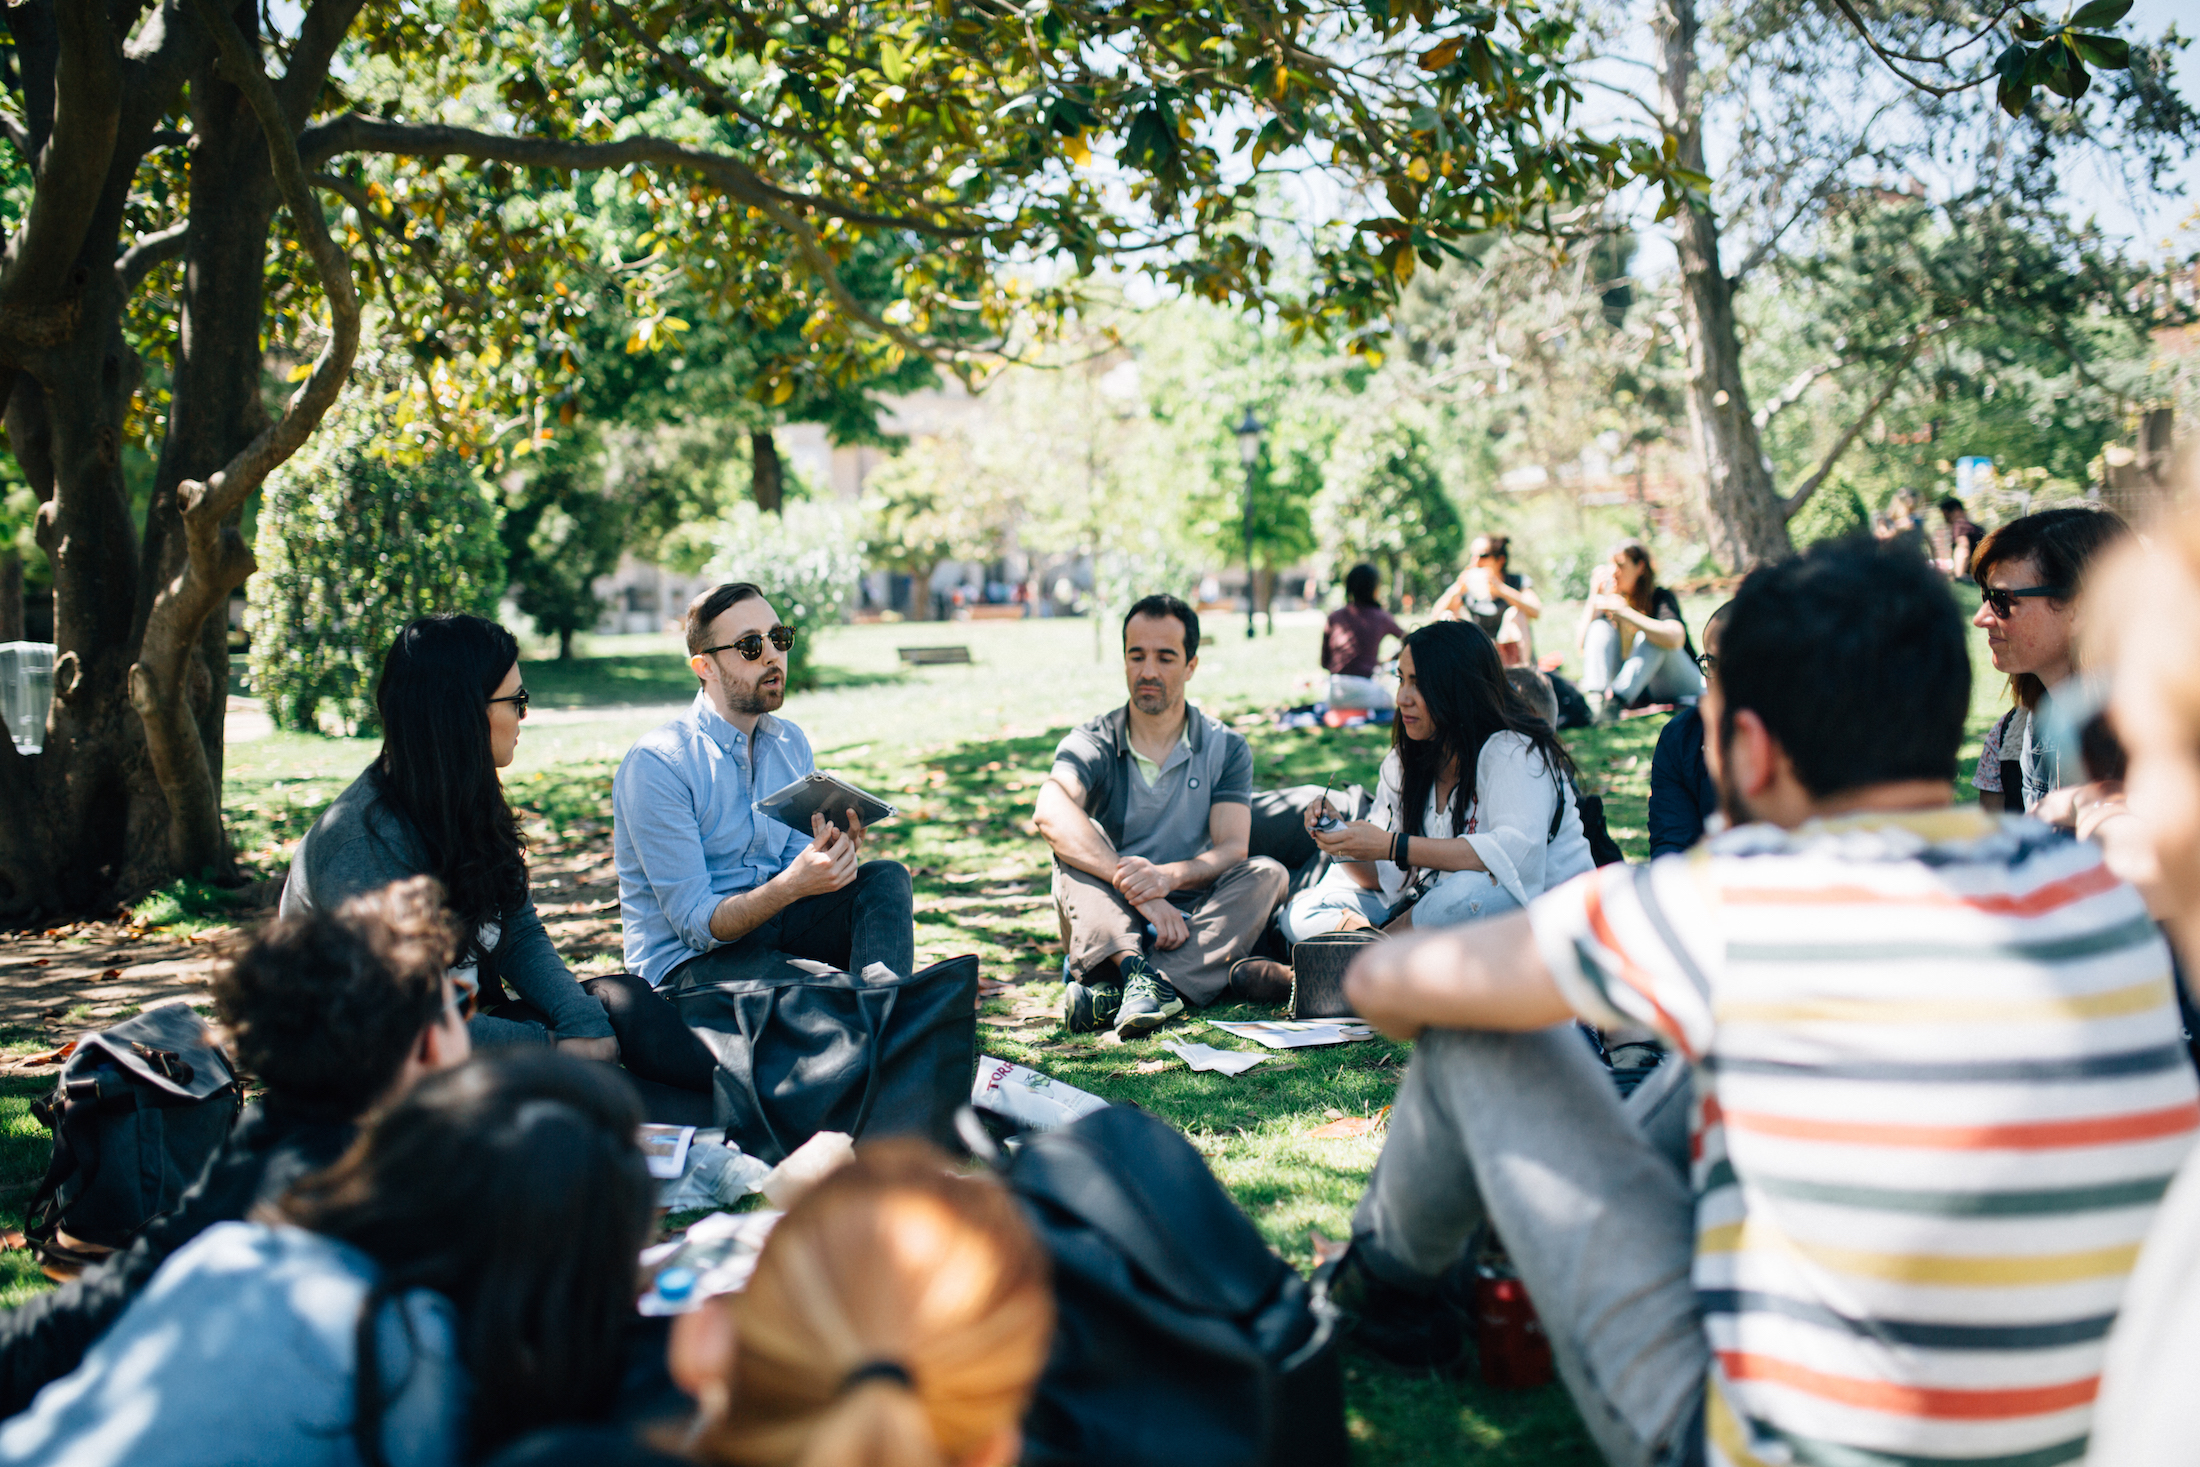  Johnny from NYC leading a workshop in the park. Flytographer:  Natalie  